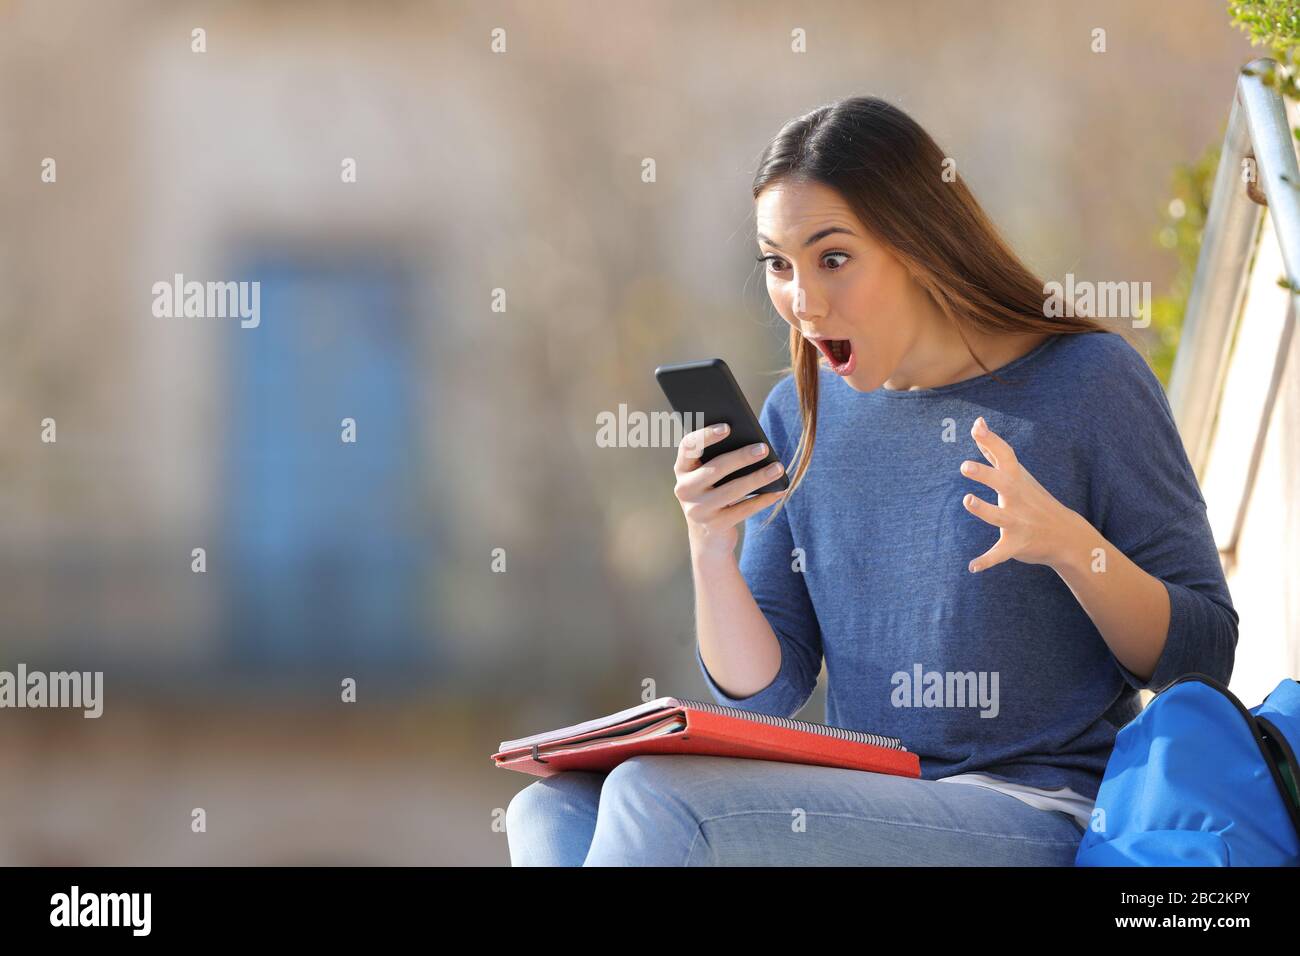 Surprised student checking mobile phone sitting outdoors in a university campus Stock Photo